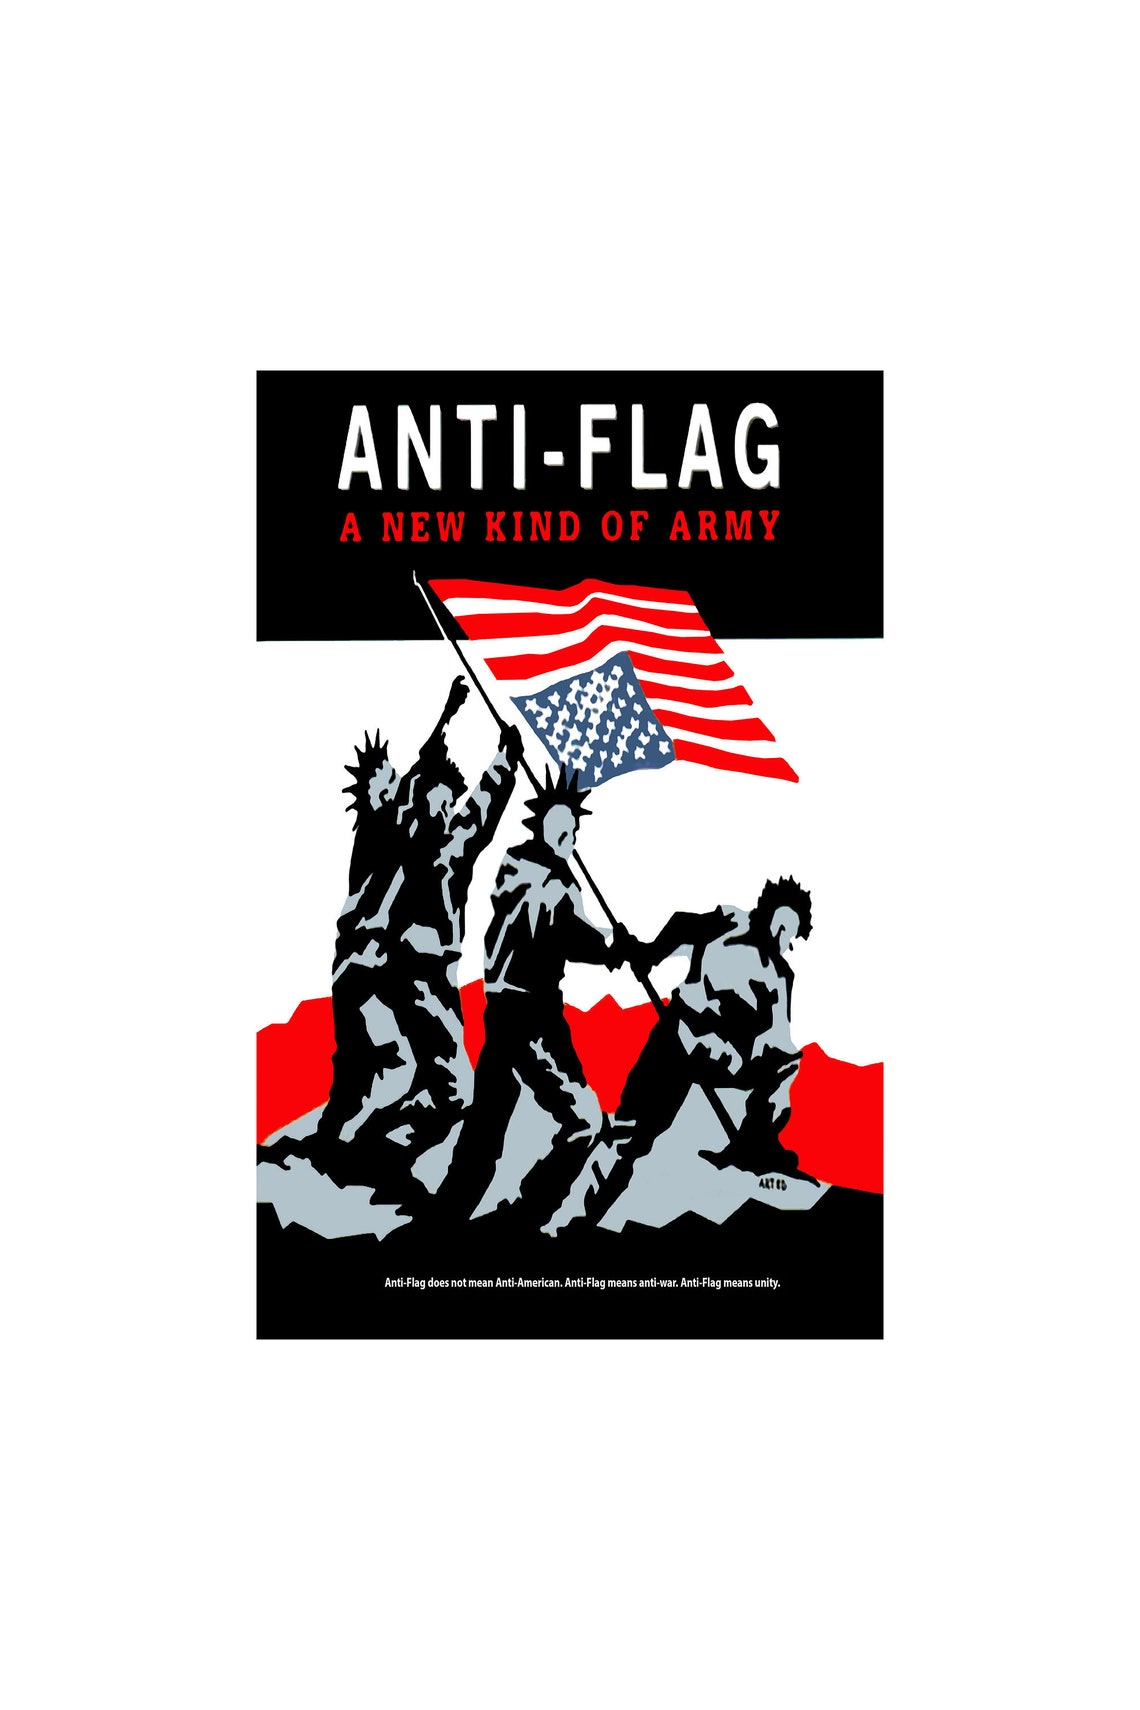 AntiFlag New Kind of Army high quality poster 11x17  Etsy